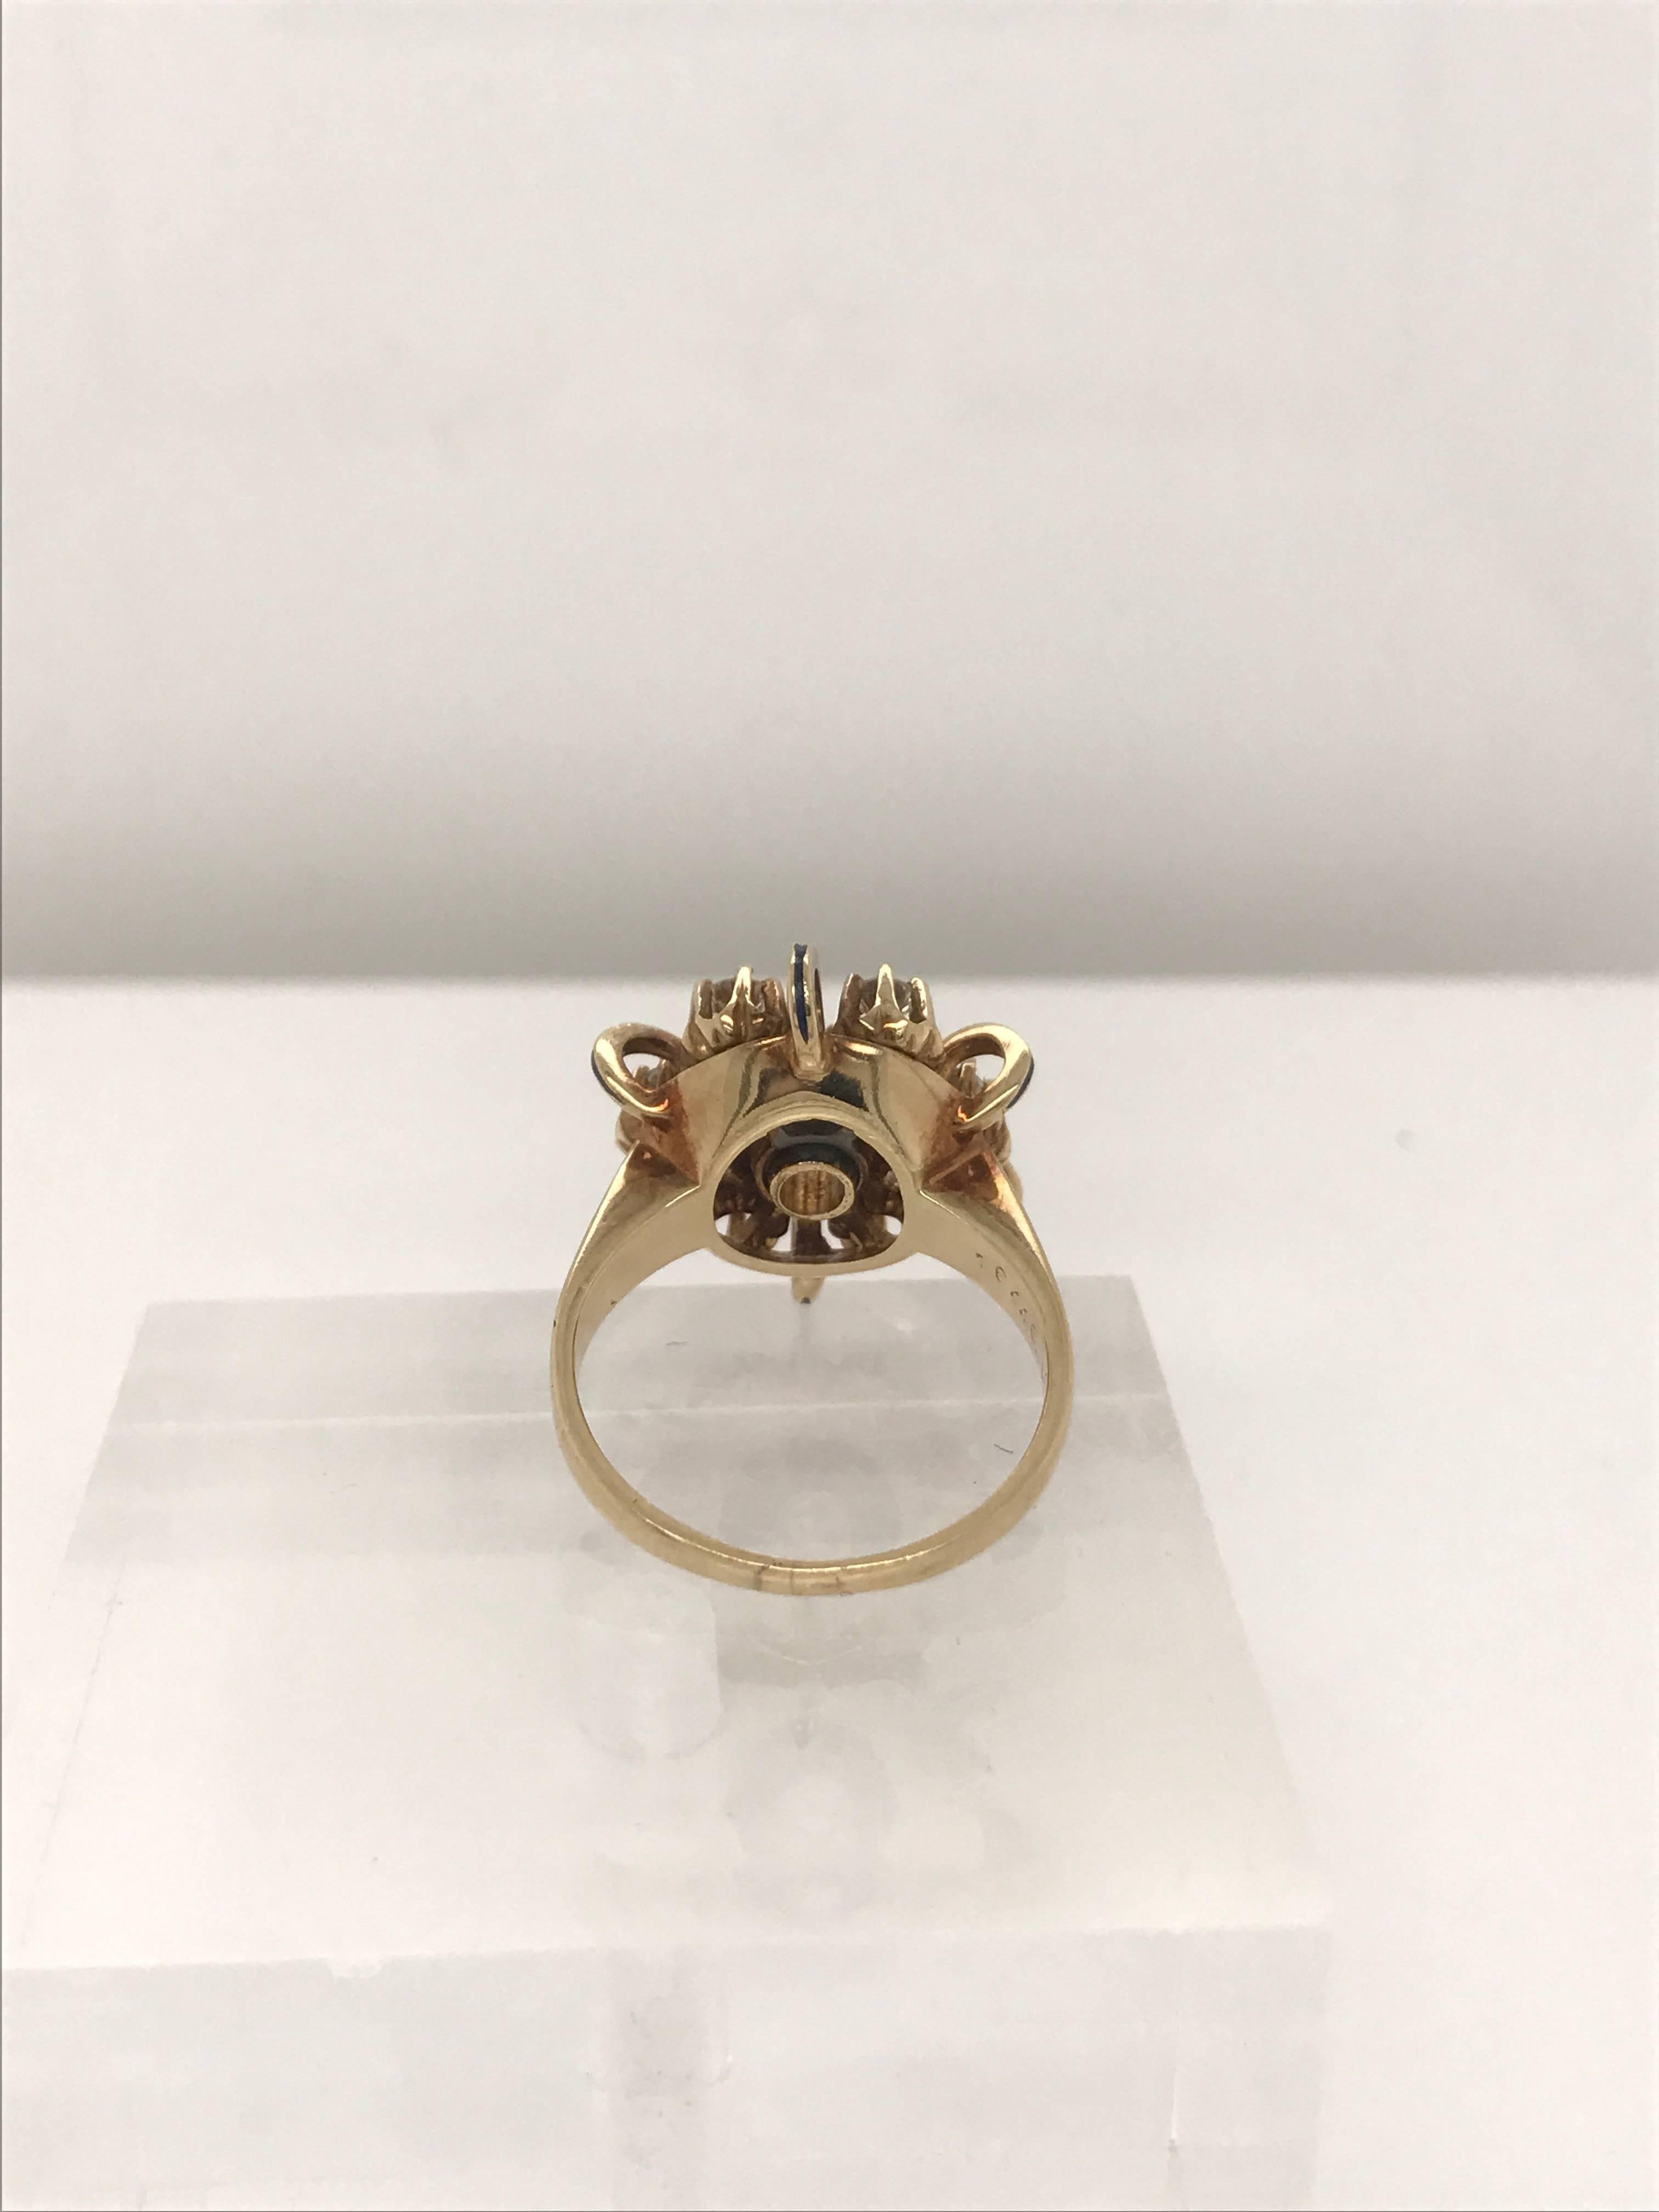 Vintage .75 Carat Diamond Ring with Blue Enamel Accents in 14 Karat Yellow Gold In Excellent Condition For Sale In New Orleans, LA